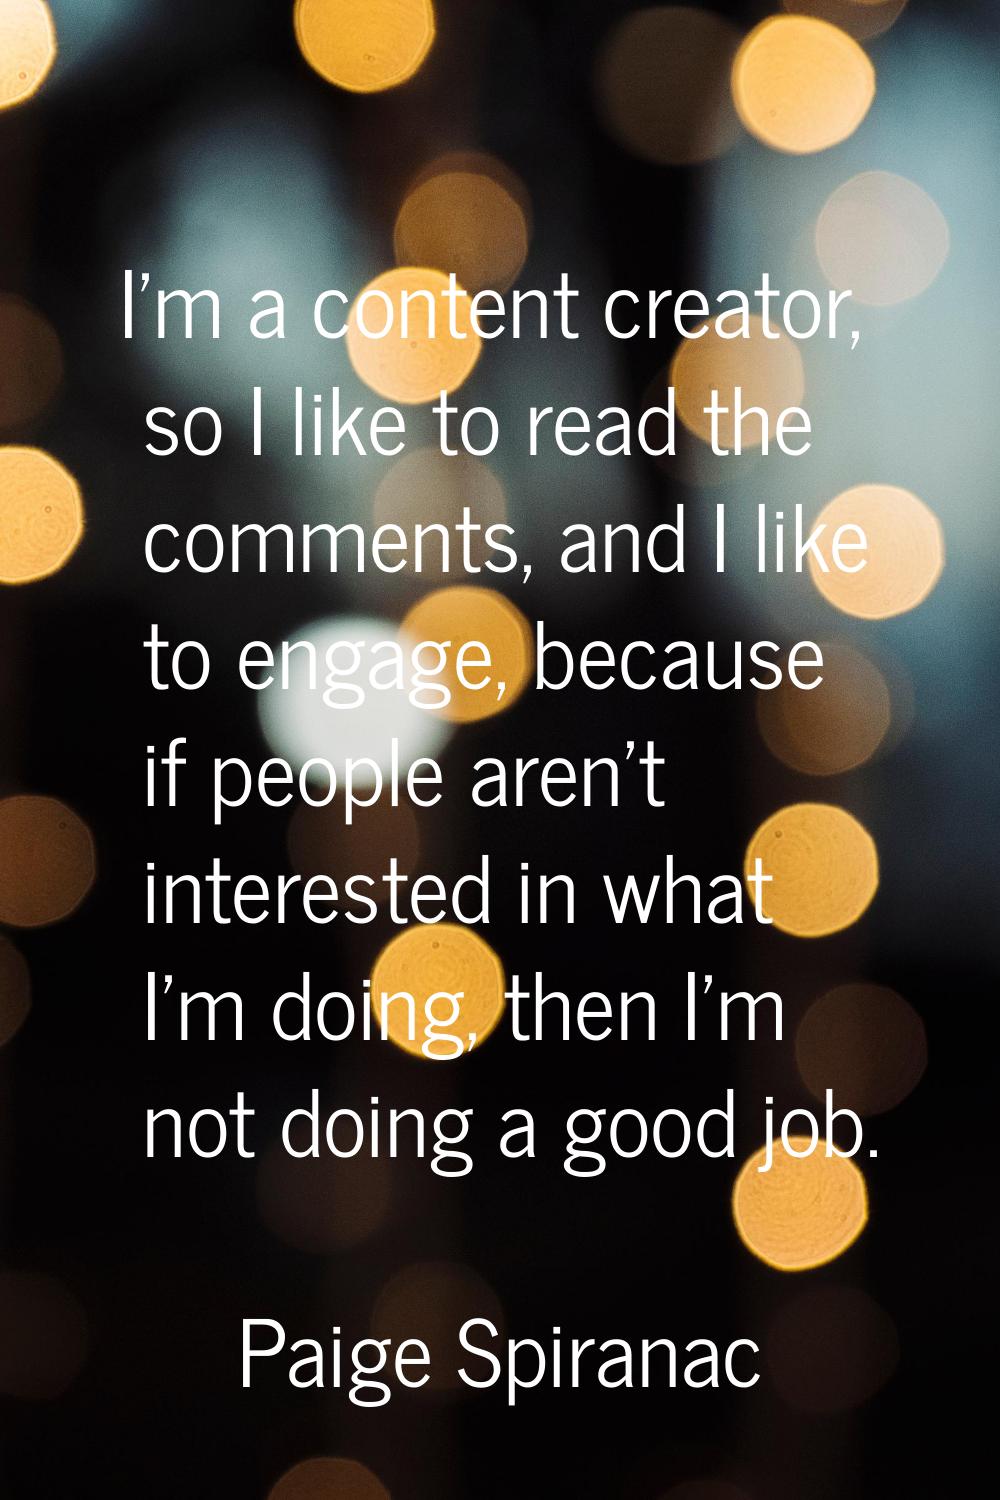 I'm a content creator, so I like to read the comments, and I like to engage, because if people aren